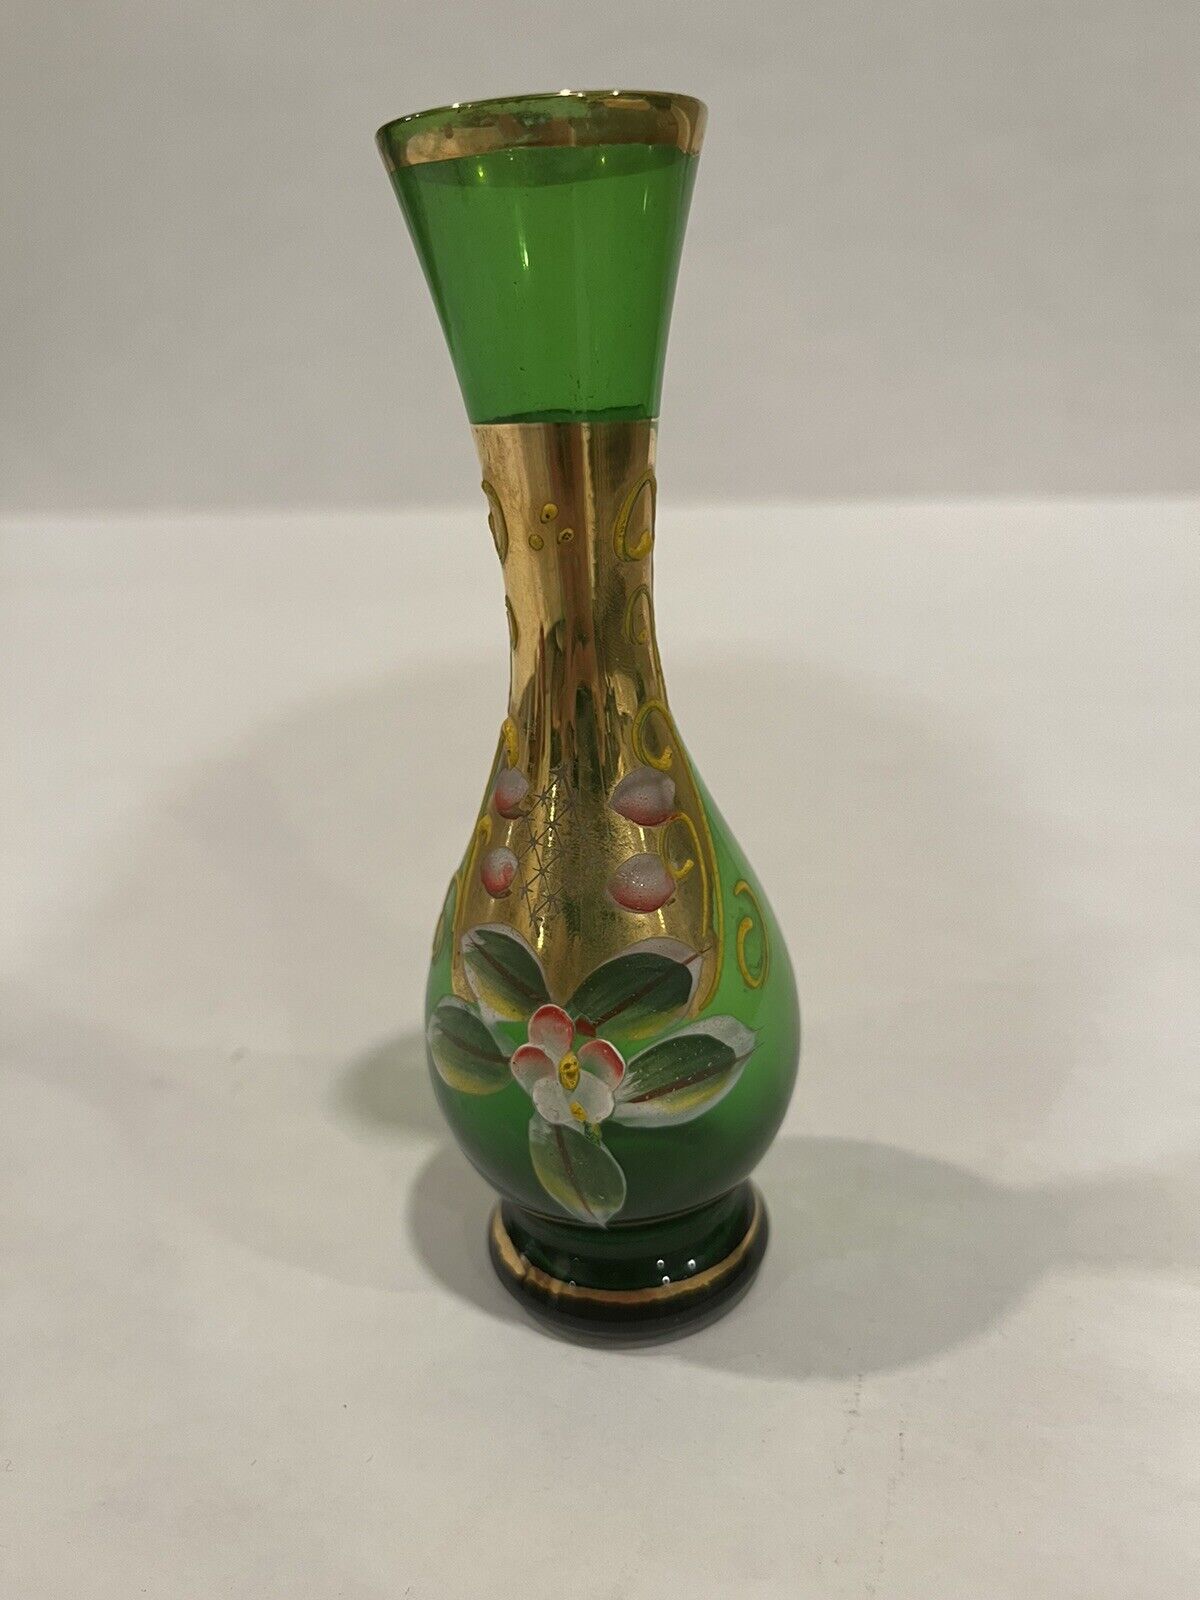 Vintage Emerald Green Glass Hand Painted Flower Bud Vase Gold Bohemian Glass